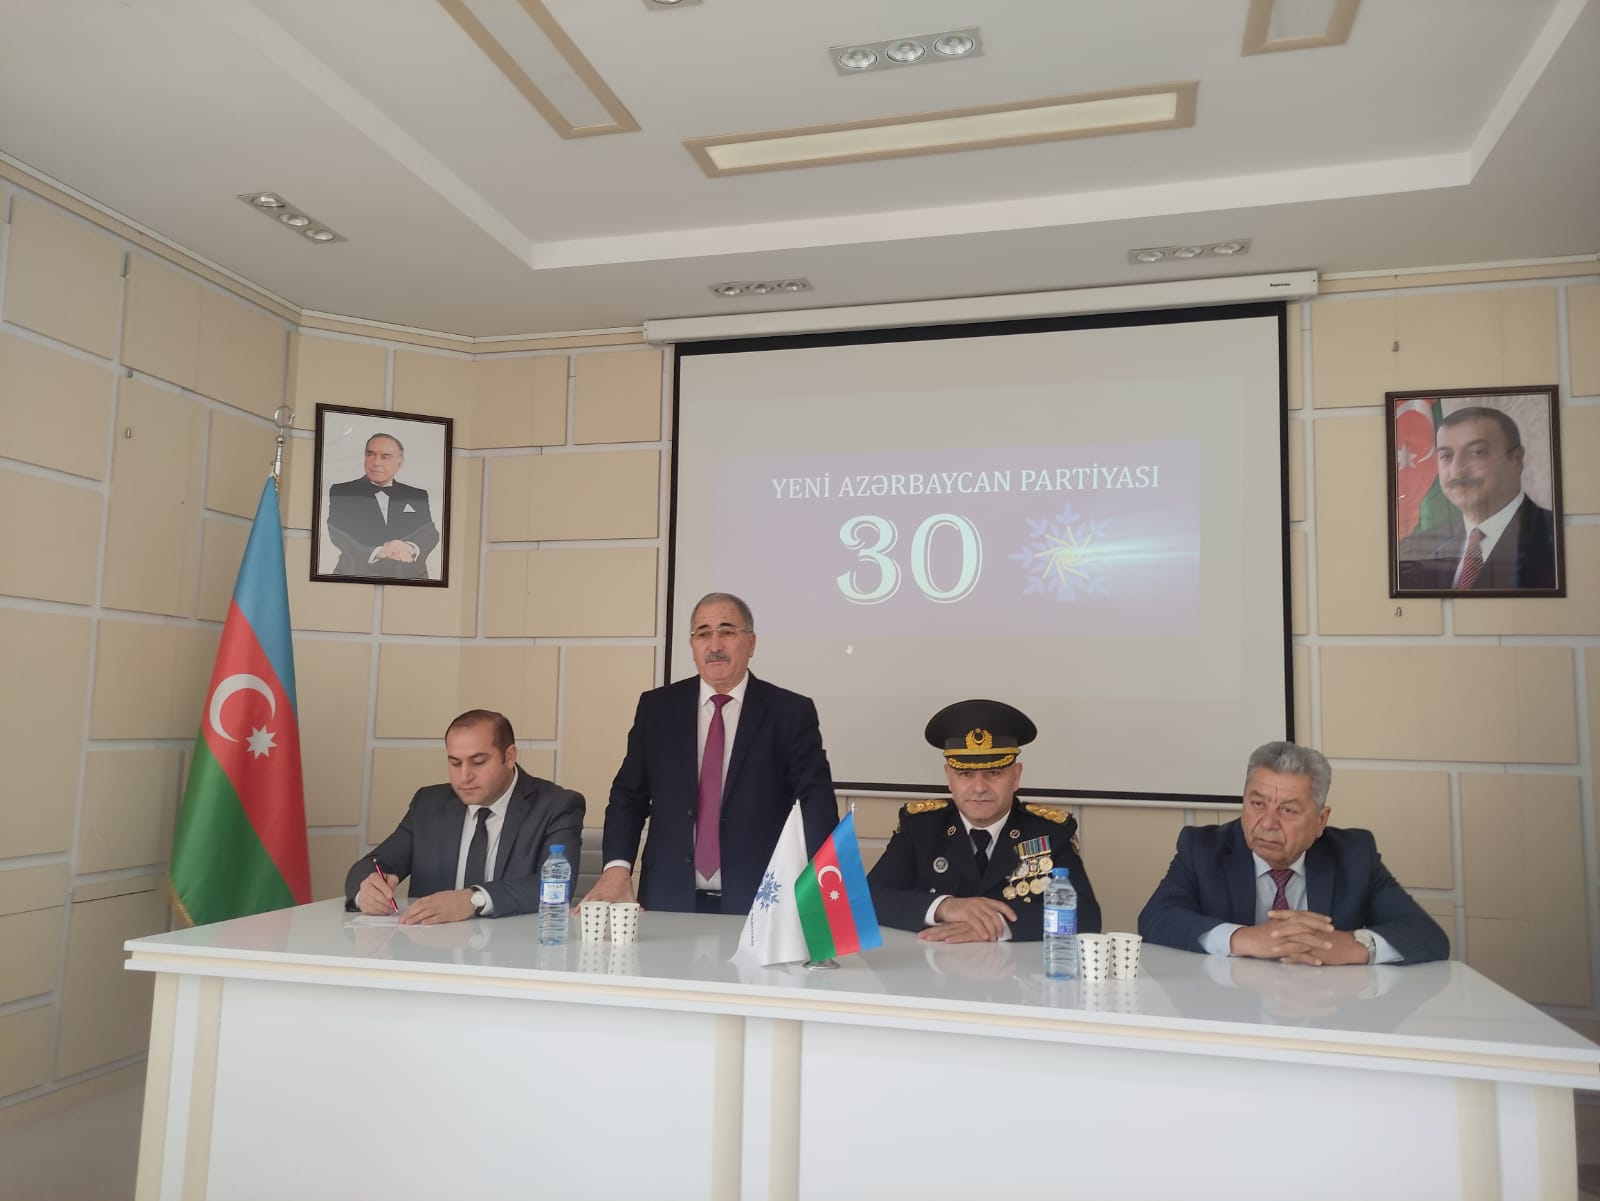 The event dedicated to the 30th anniversary of the founding of the New Azerbaijan Party was held at the Institute of Soil Science and Agrochemistry.